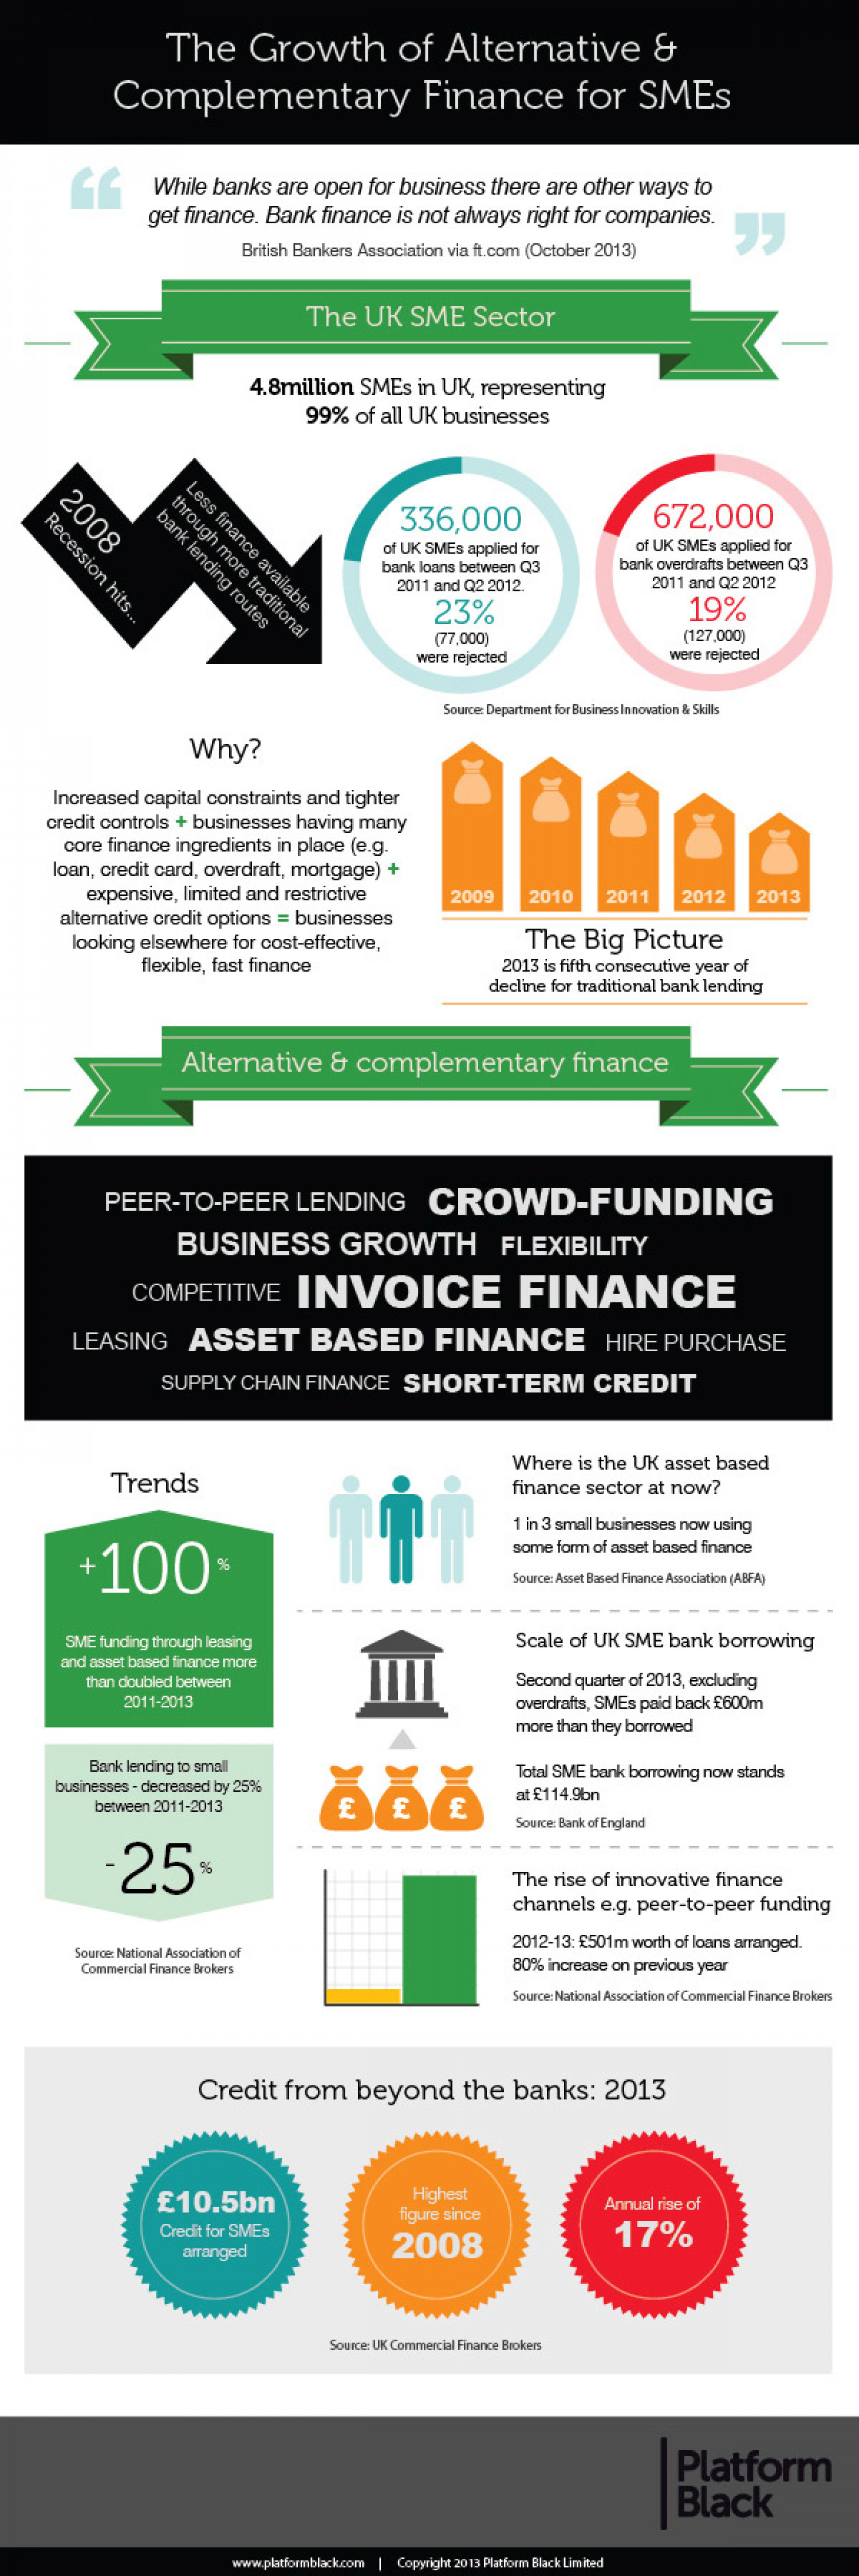 The Growth in Alternative & Complementary Finance Infographic